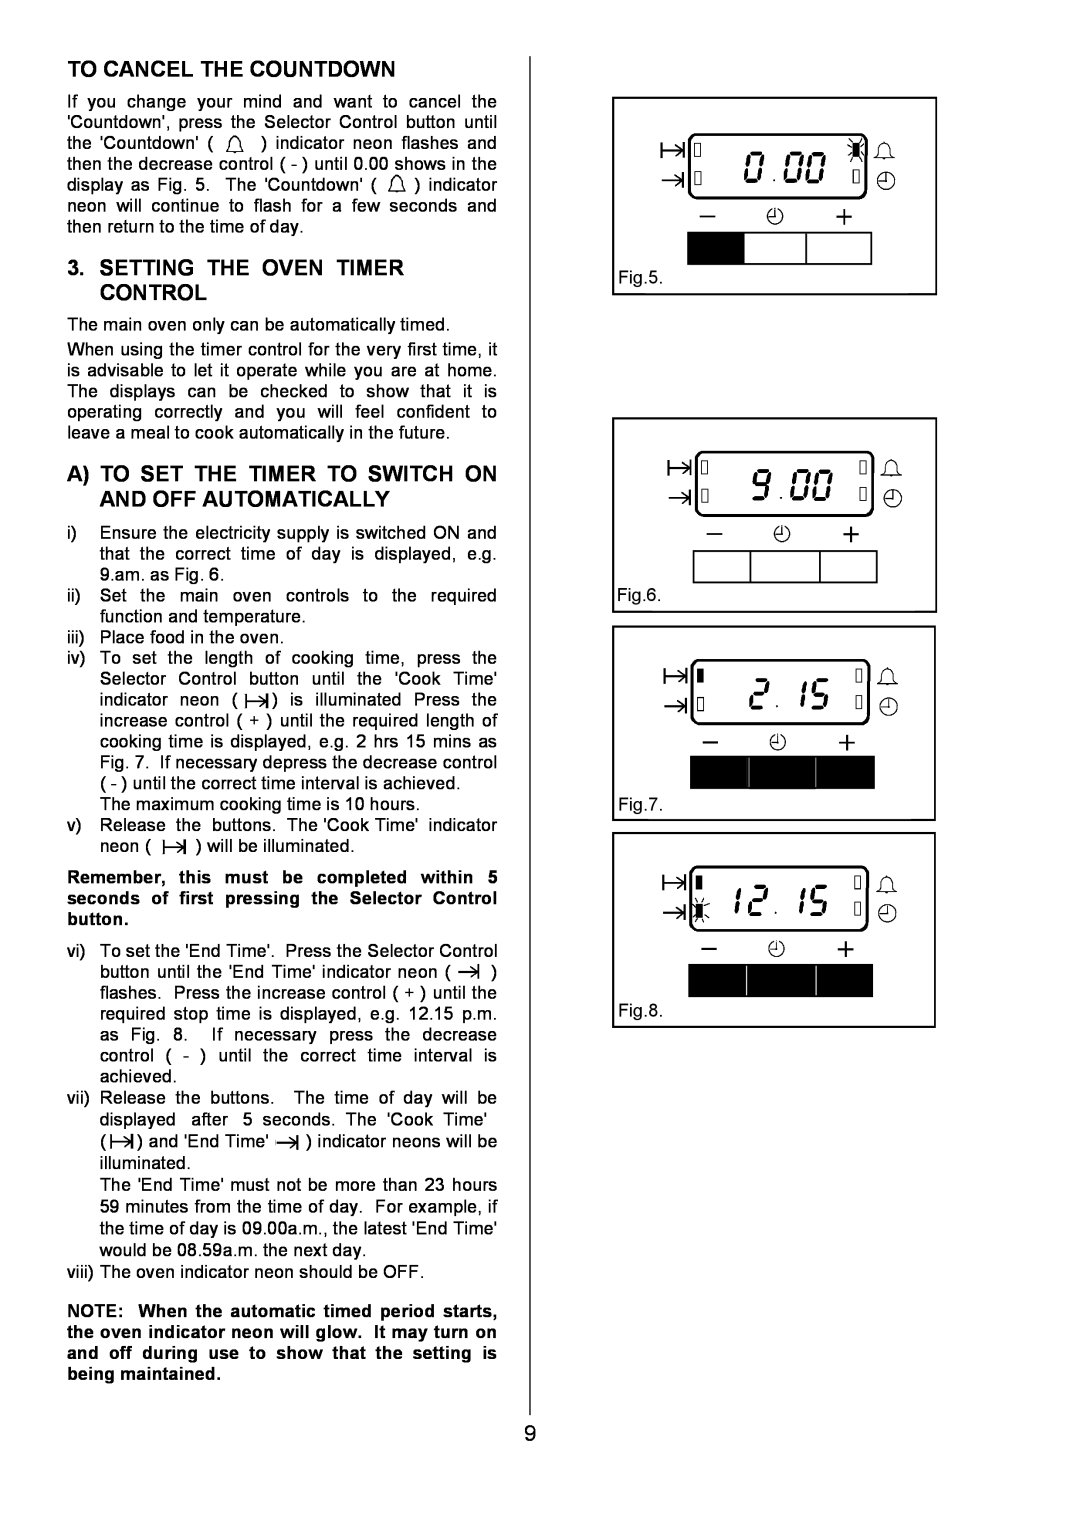 Electrolux U7101-4 operating instructions To Cancel The Countdown, Setting The Oven Timer Control 